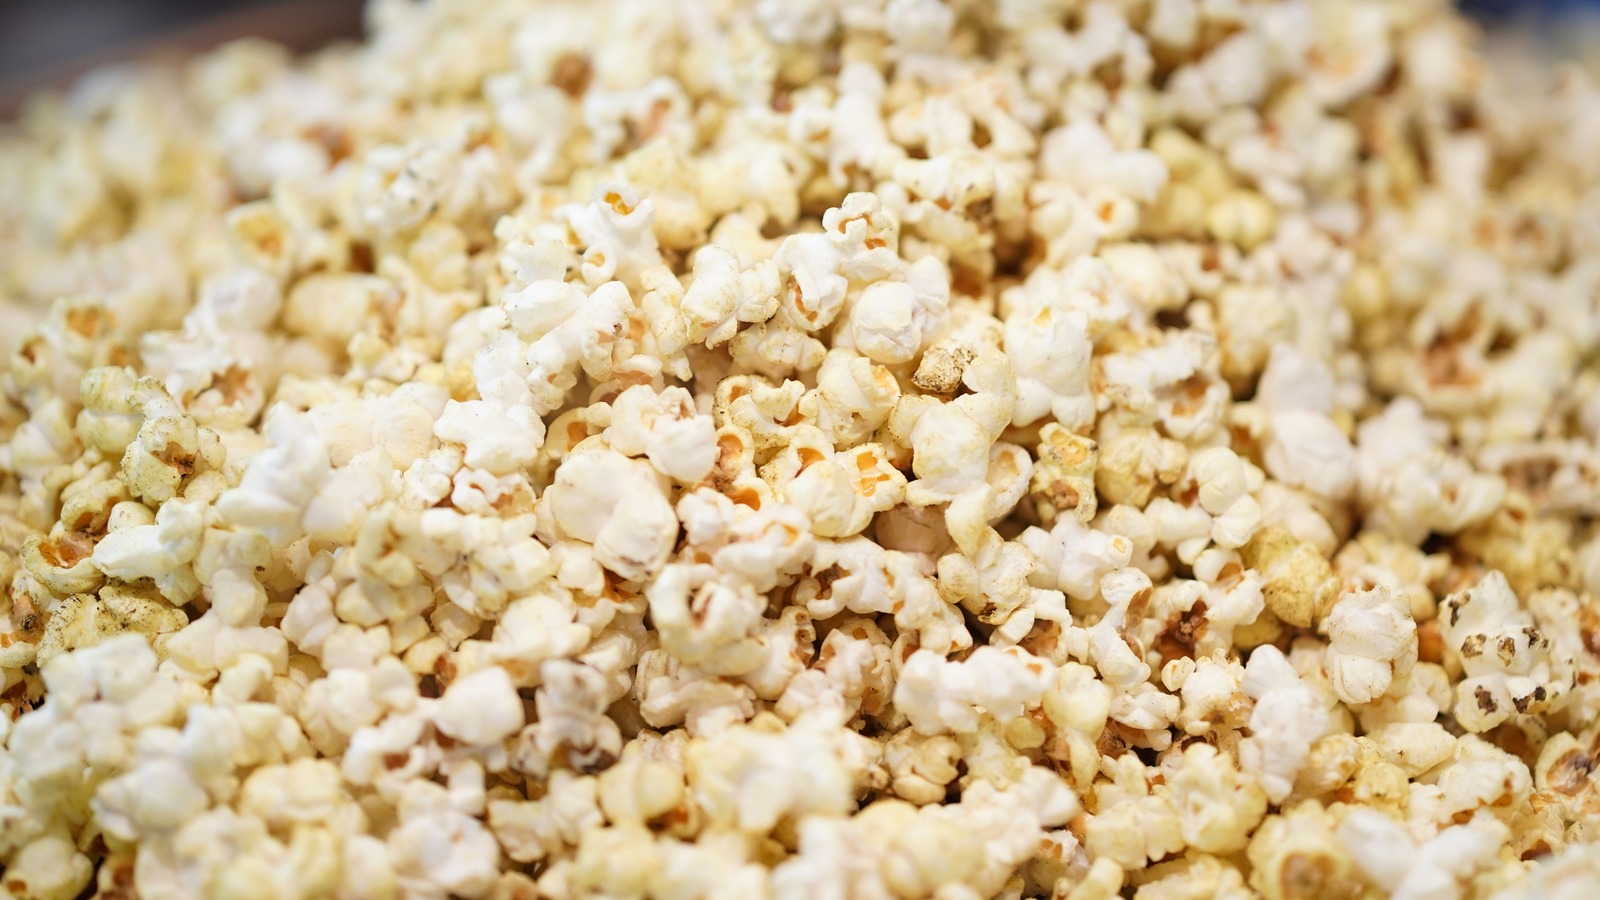 This Surprising Item Is The Key To Perfectly Buttered Movie Theater Popcorn